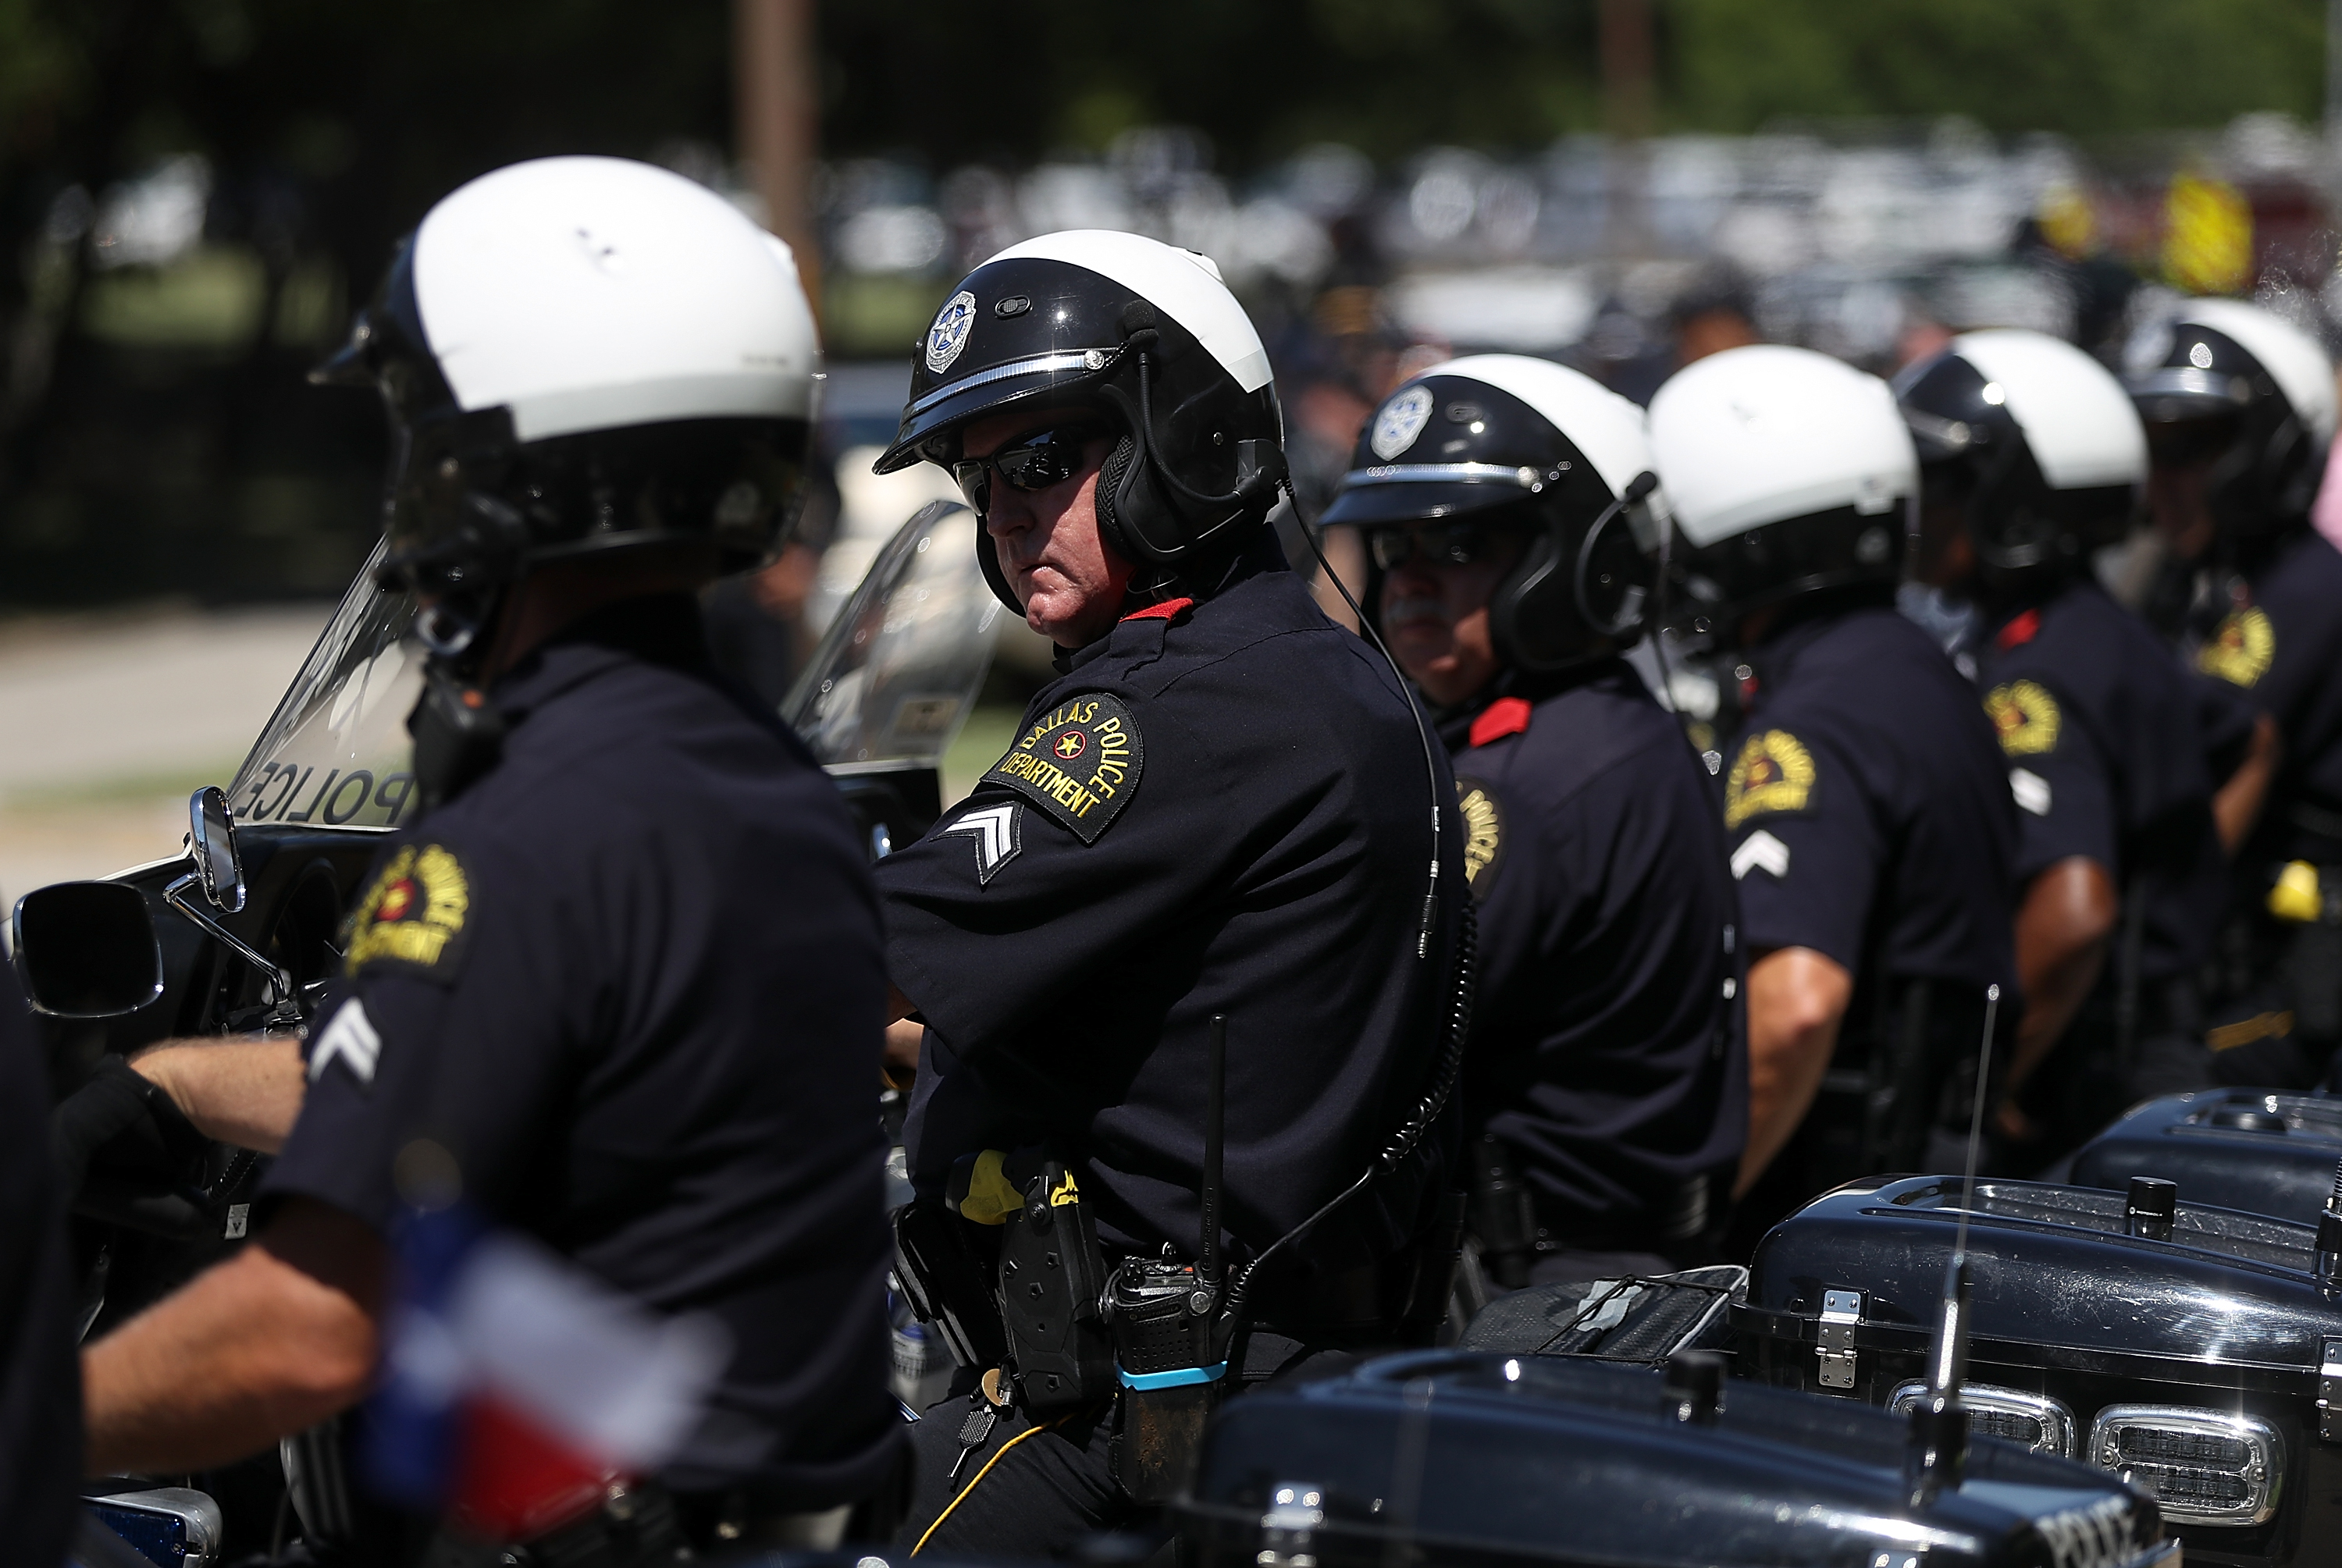 Texas Law Enforcement Group Wants Changes To Open Carry, But Will